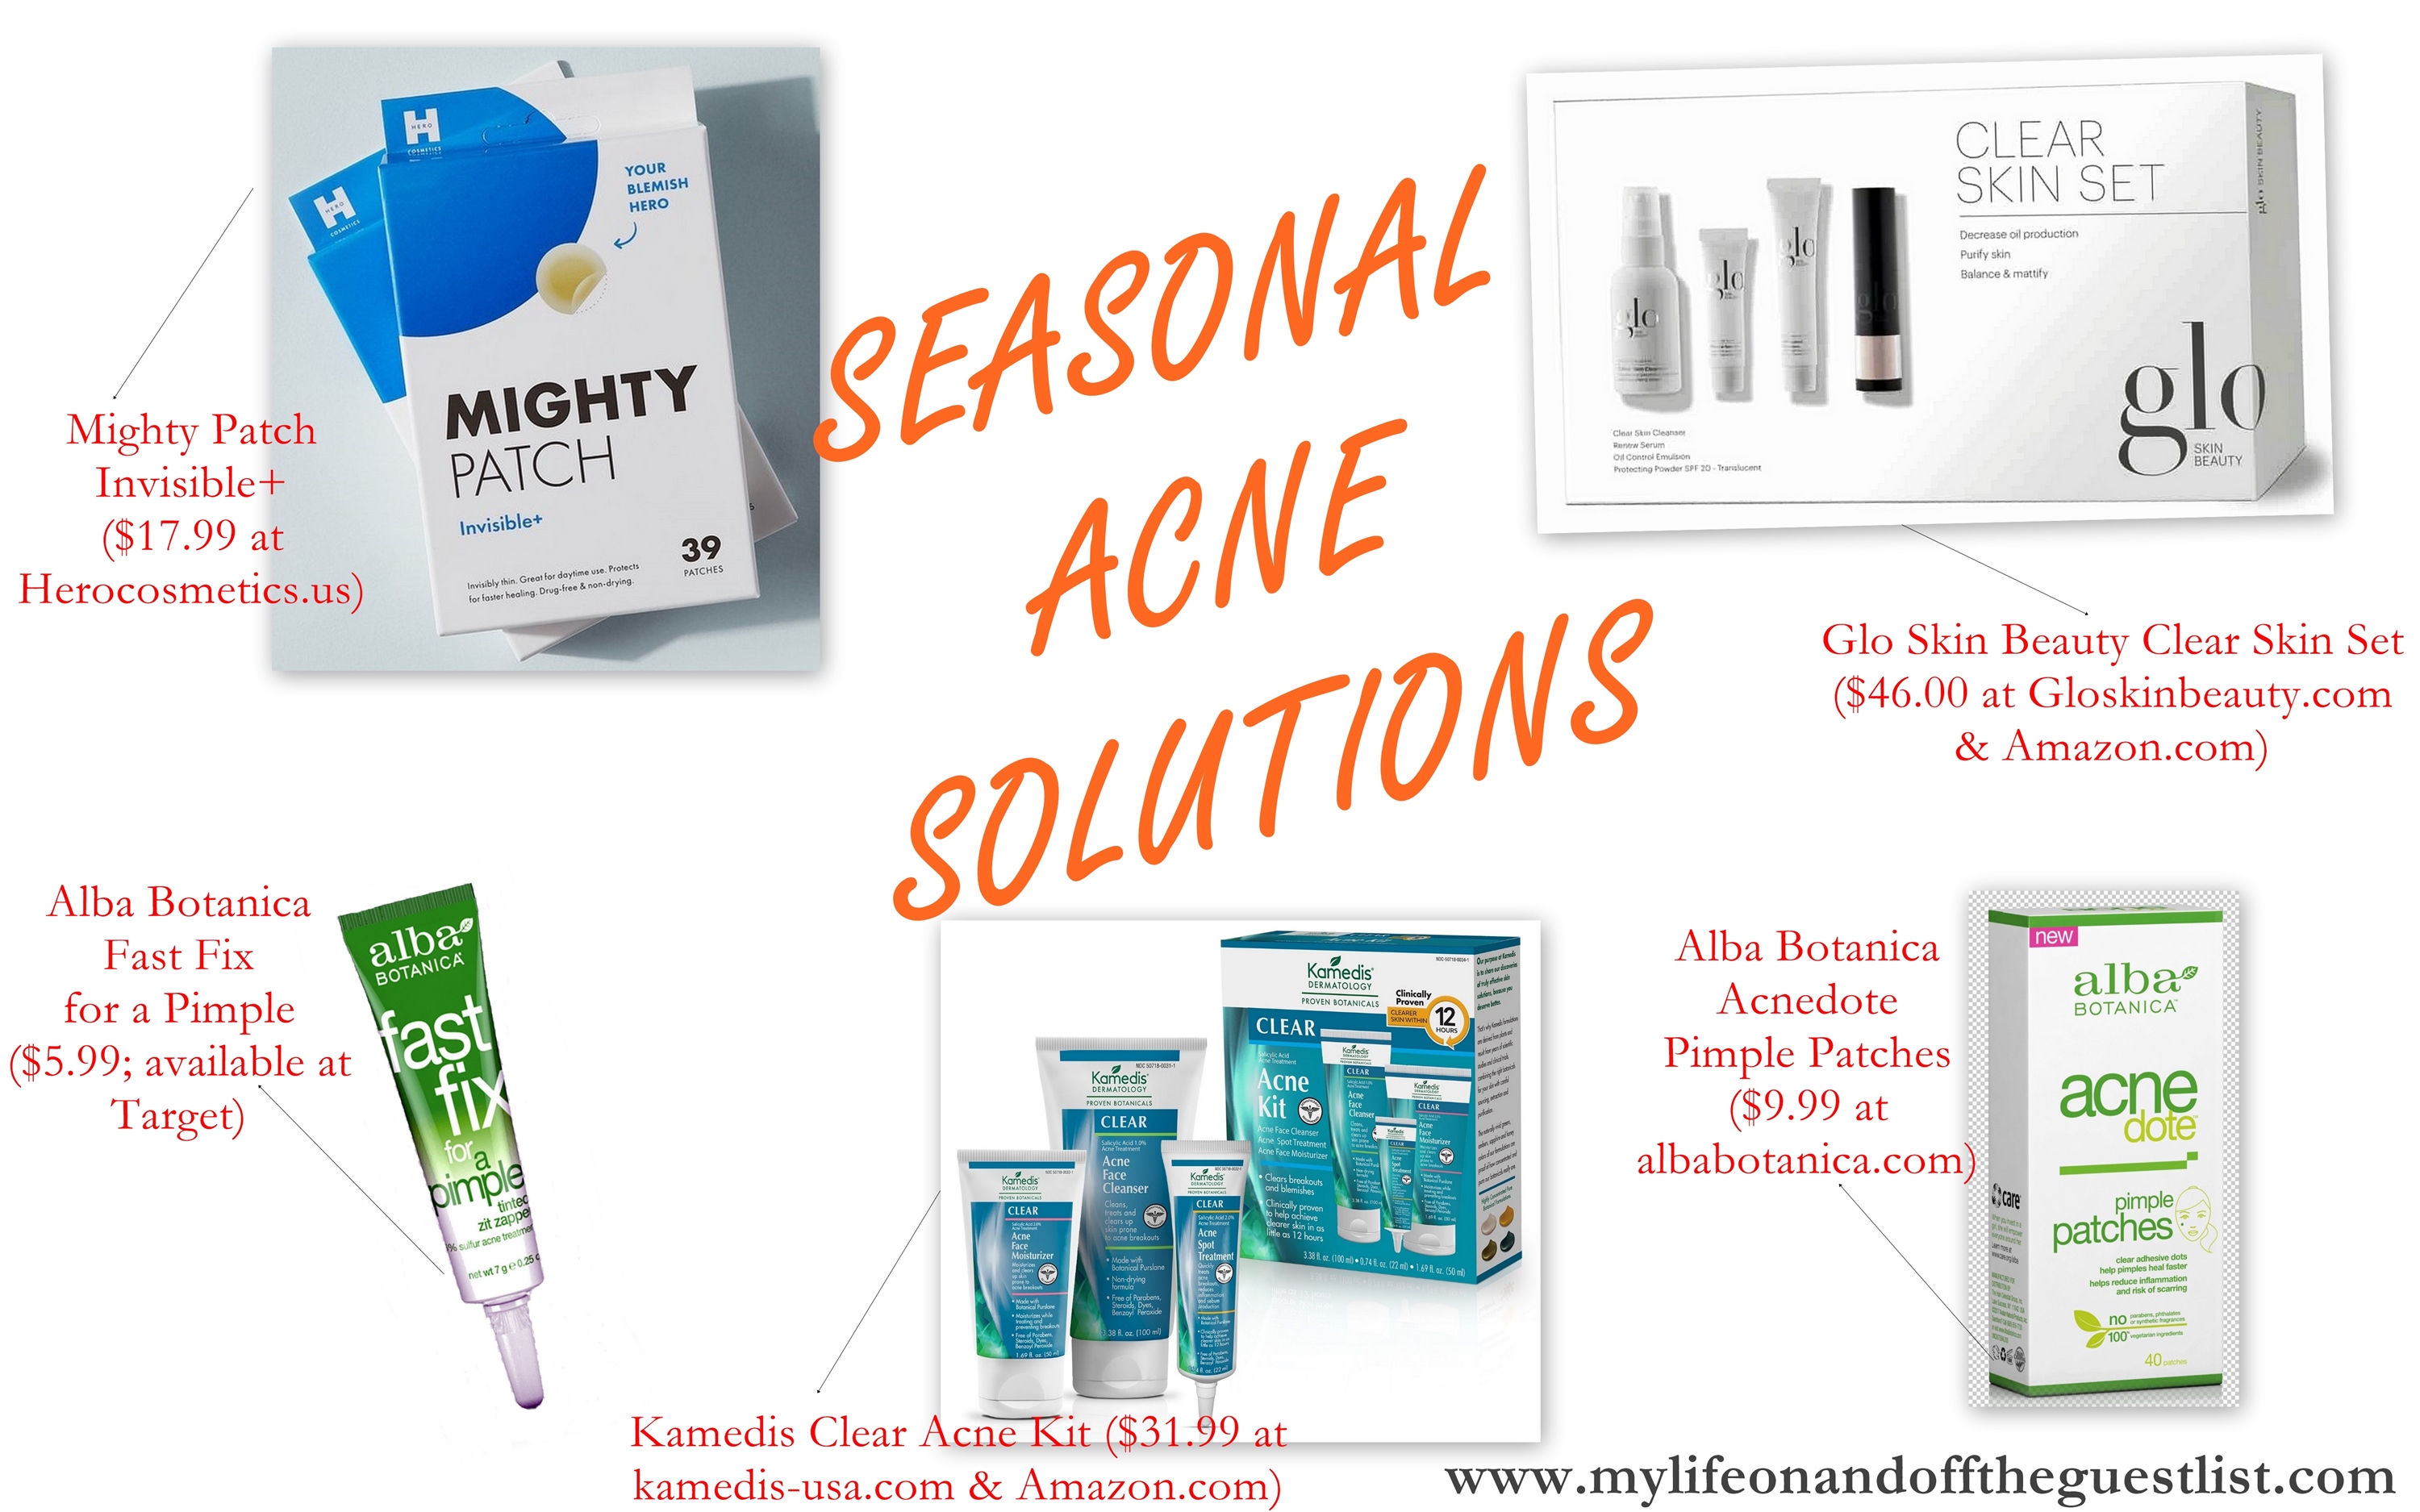 Acne Solutions for Acne Breakouts